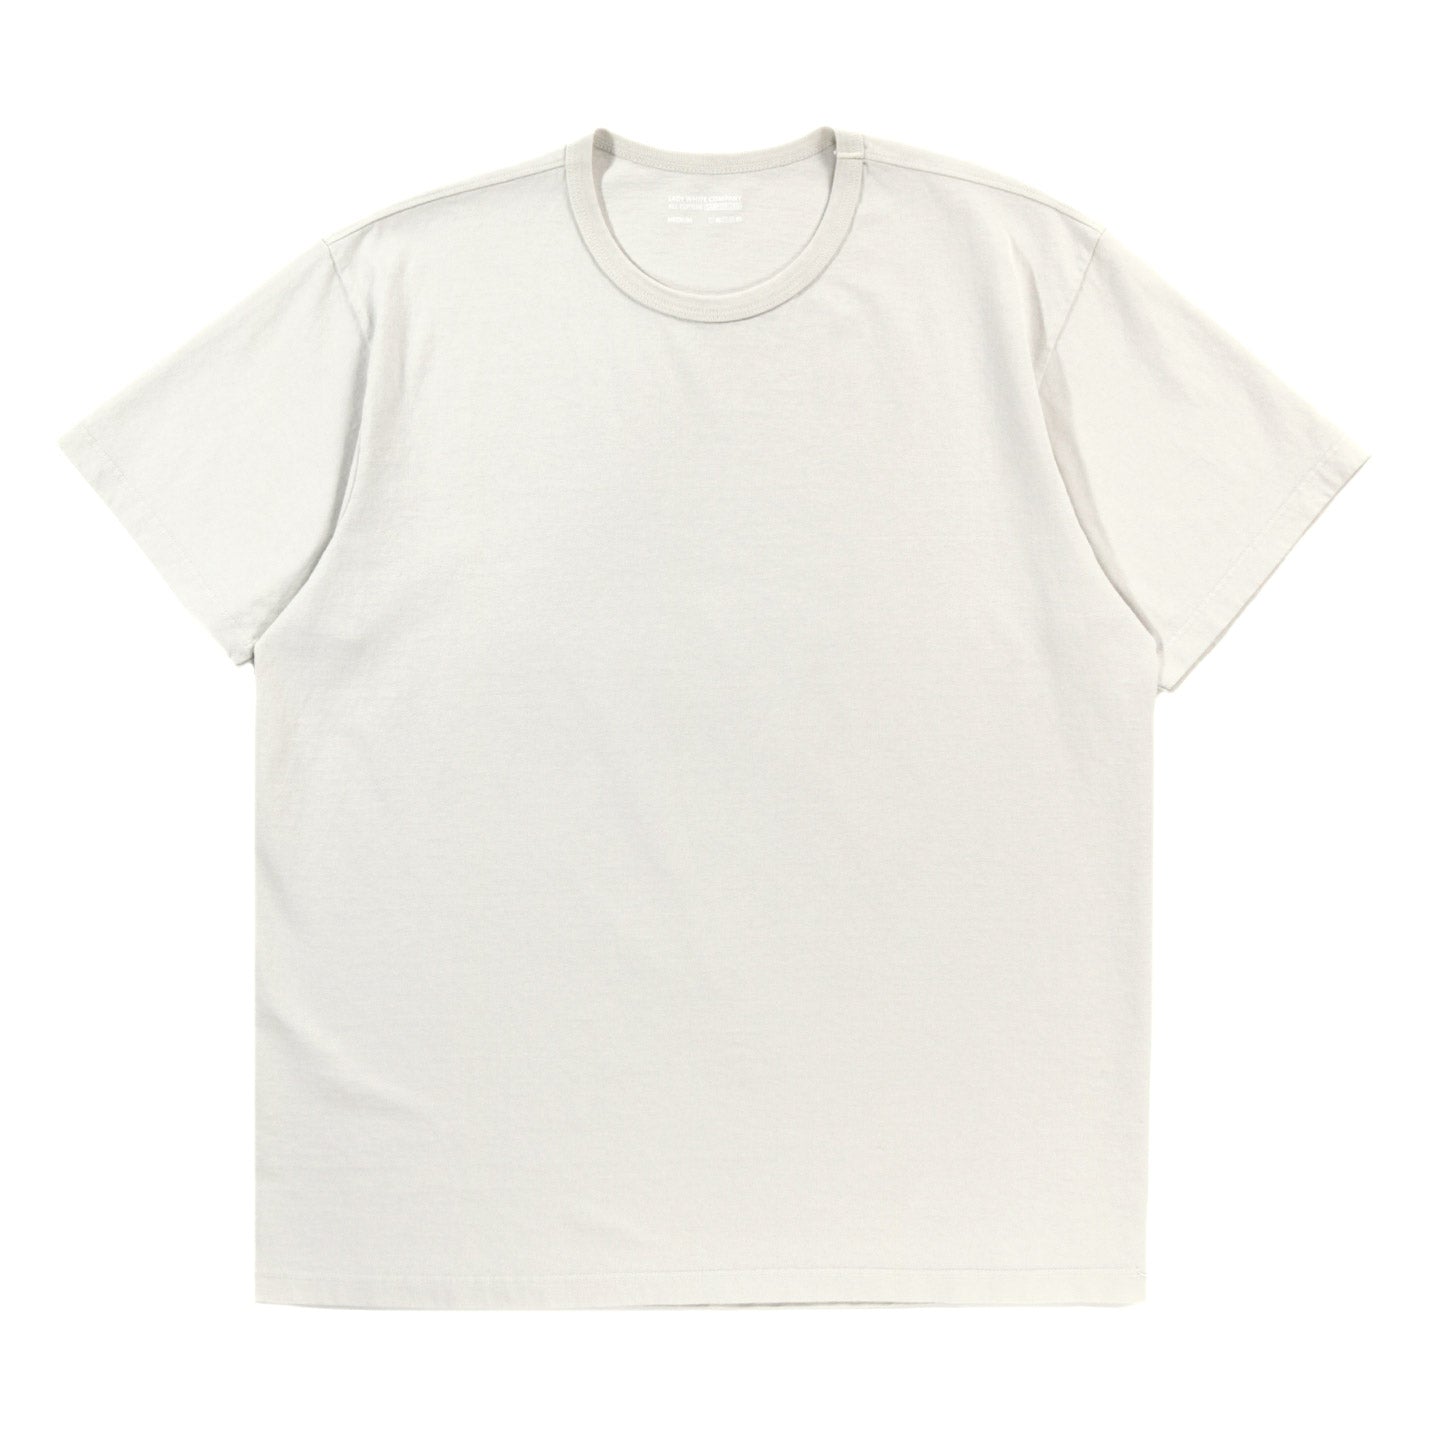 LADY WHITE CO. T-SHIRT 2-PACK OFF WHITE